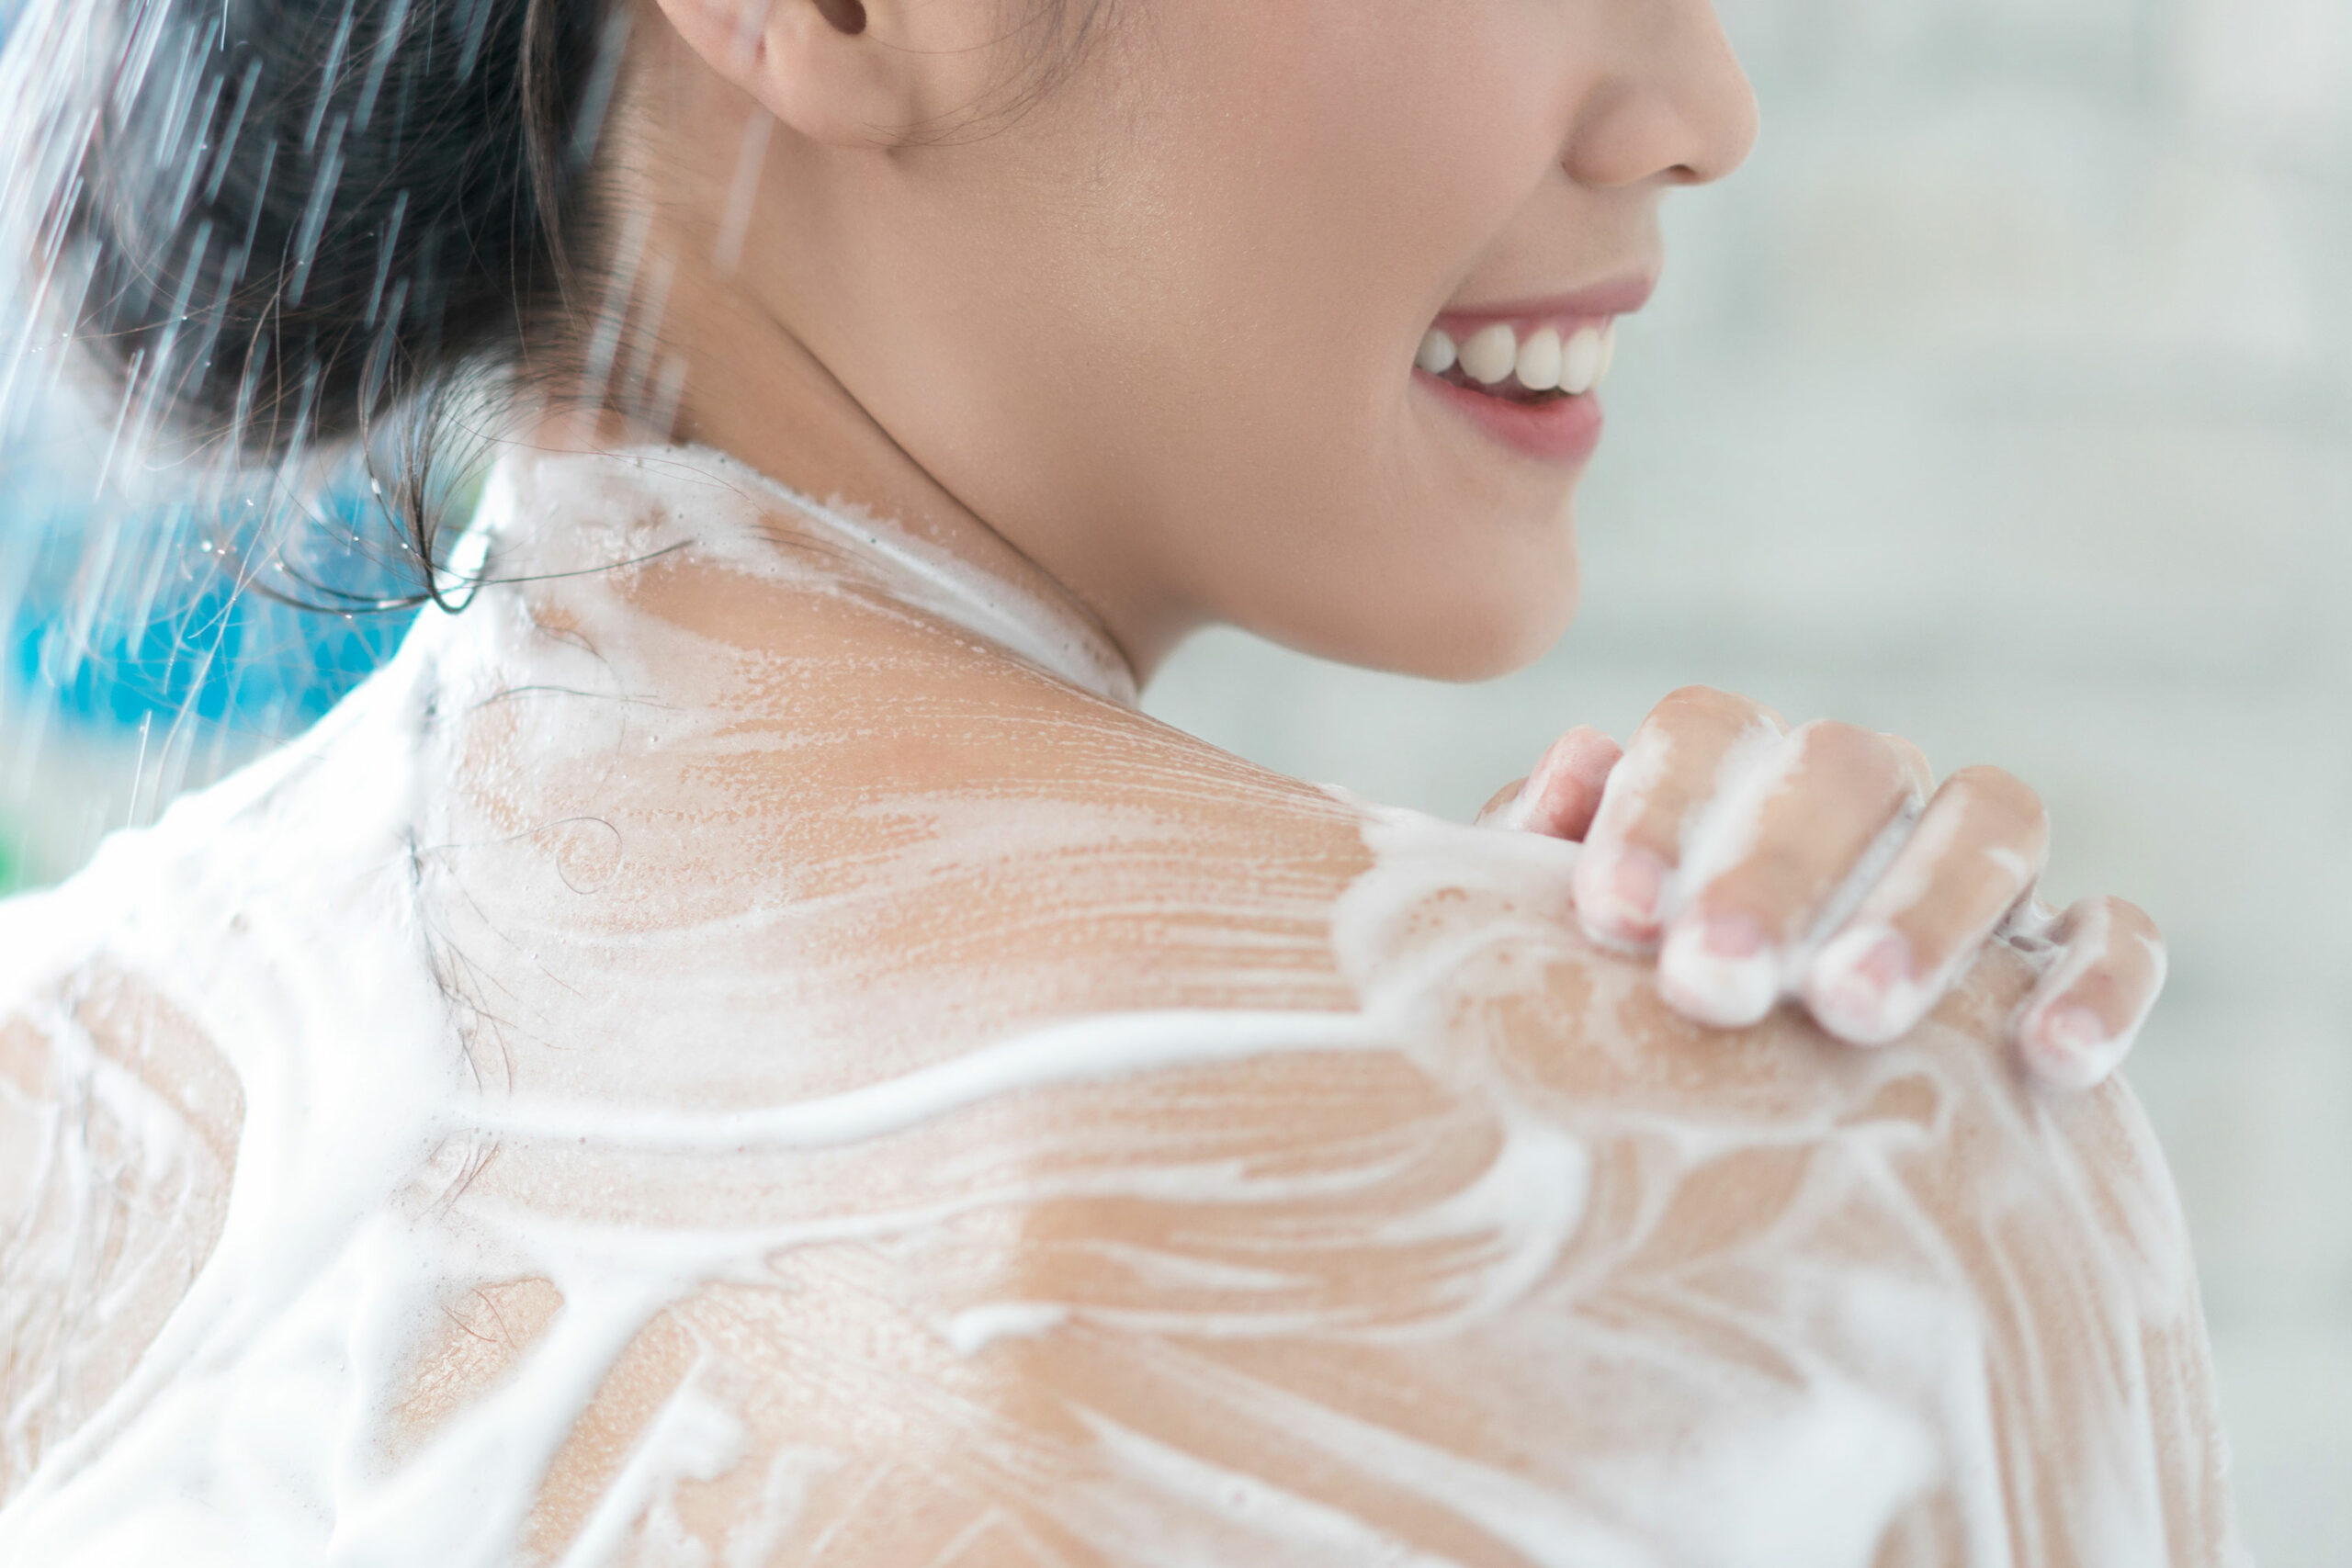 10 TIPS FOR SHOWERING FOR THOSE WITH SENSITIVE SKIN